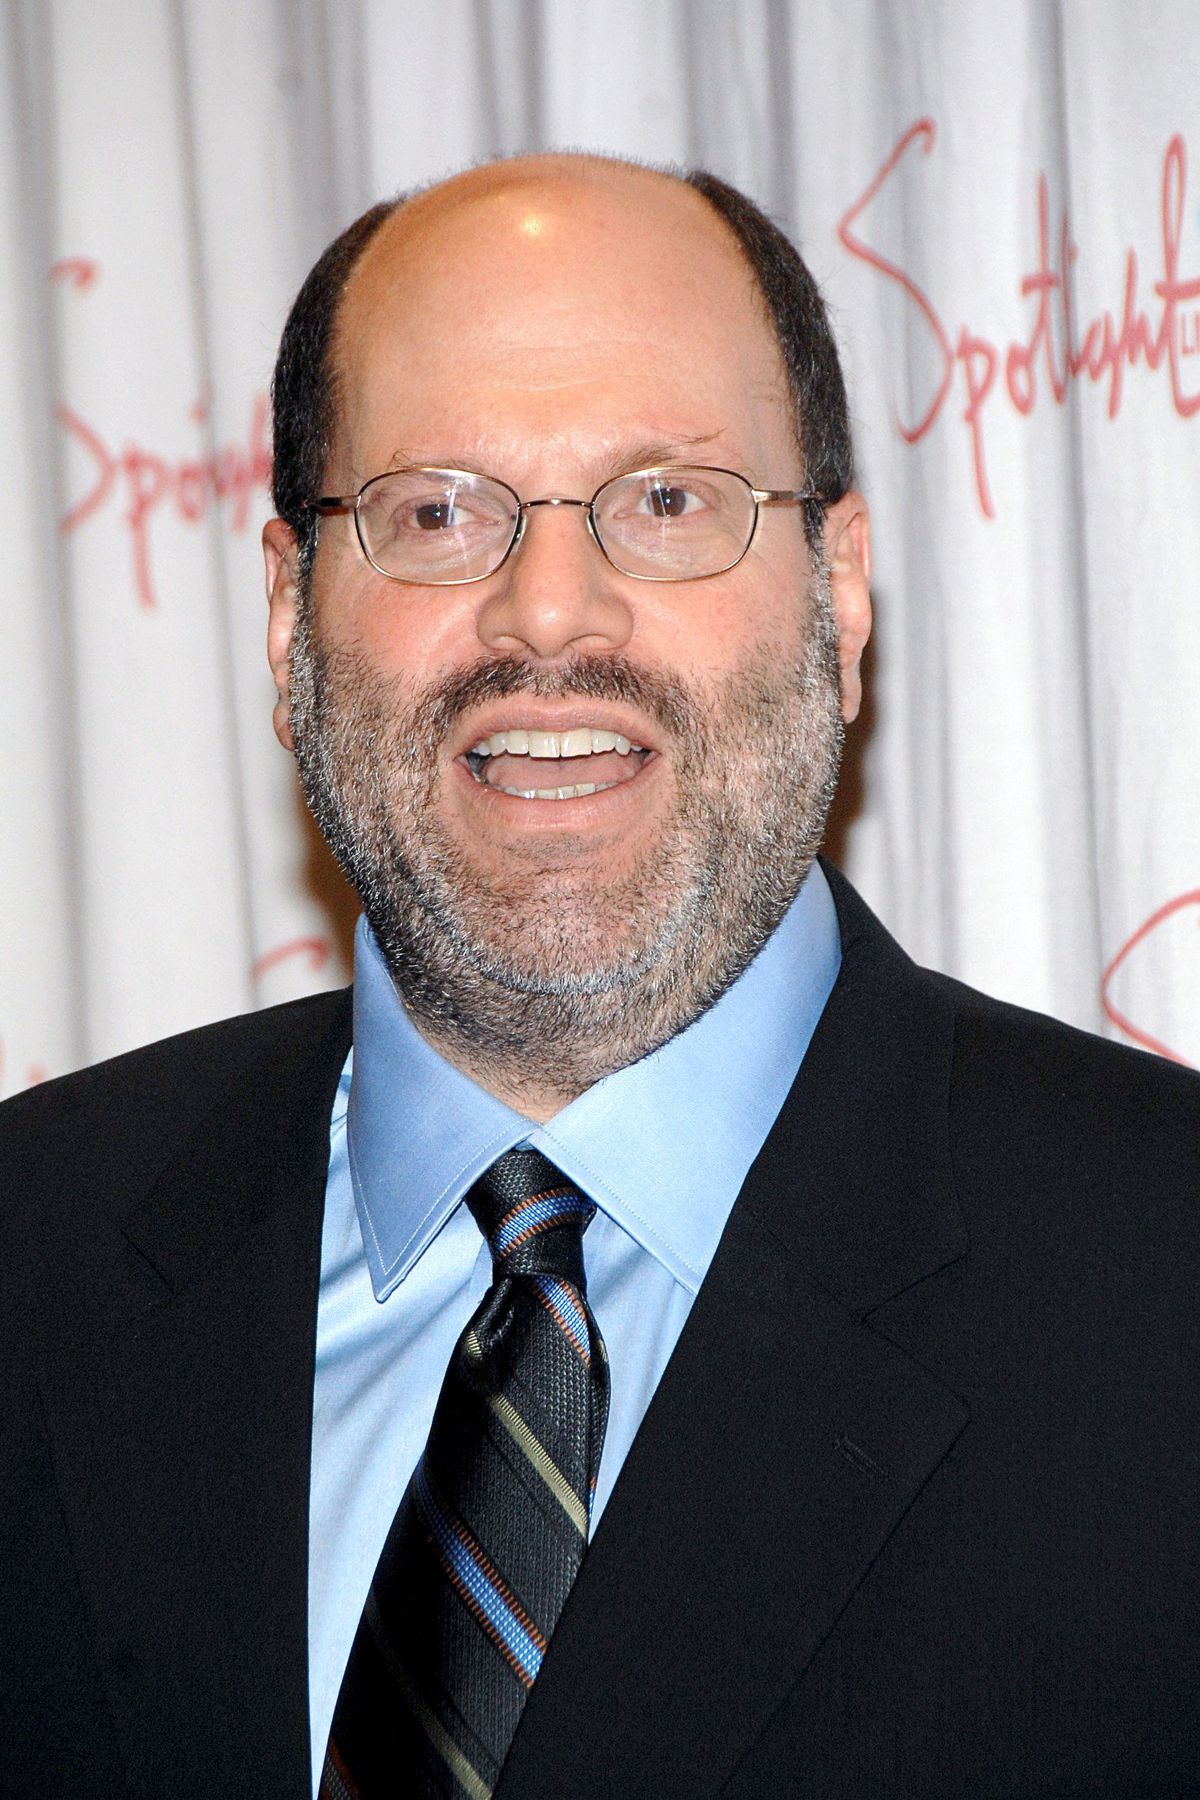 Scott Rudin at the 73rd Annual New York Film Critics Circle Awards, during Spotlight Live Times Square in New York, NY, on January 06, 2008.